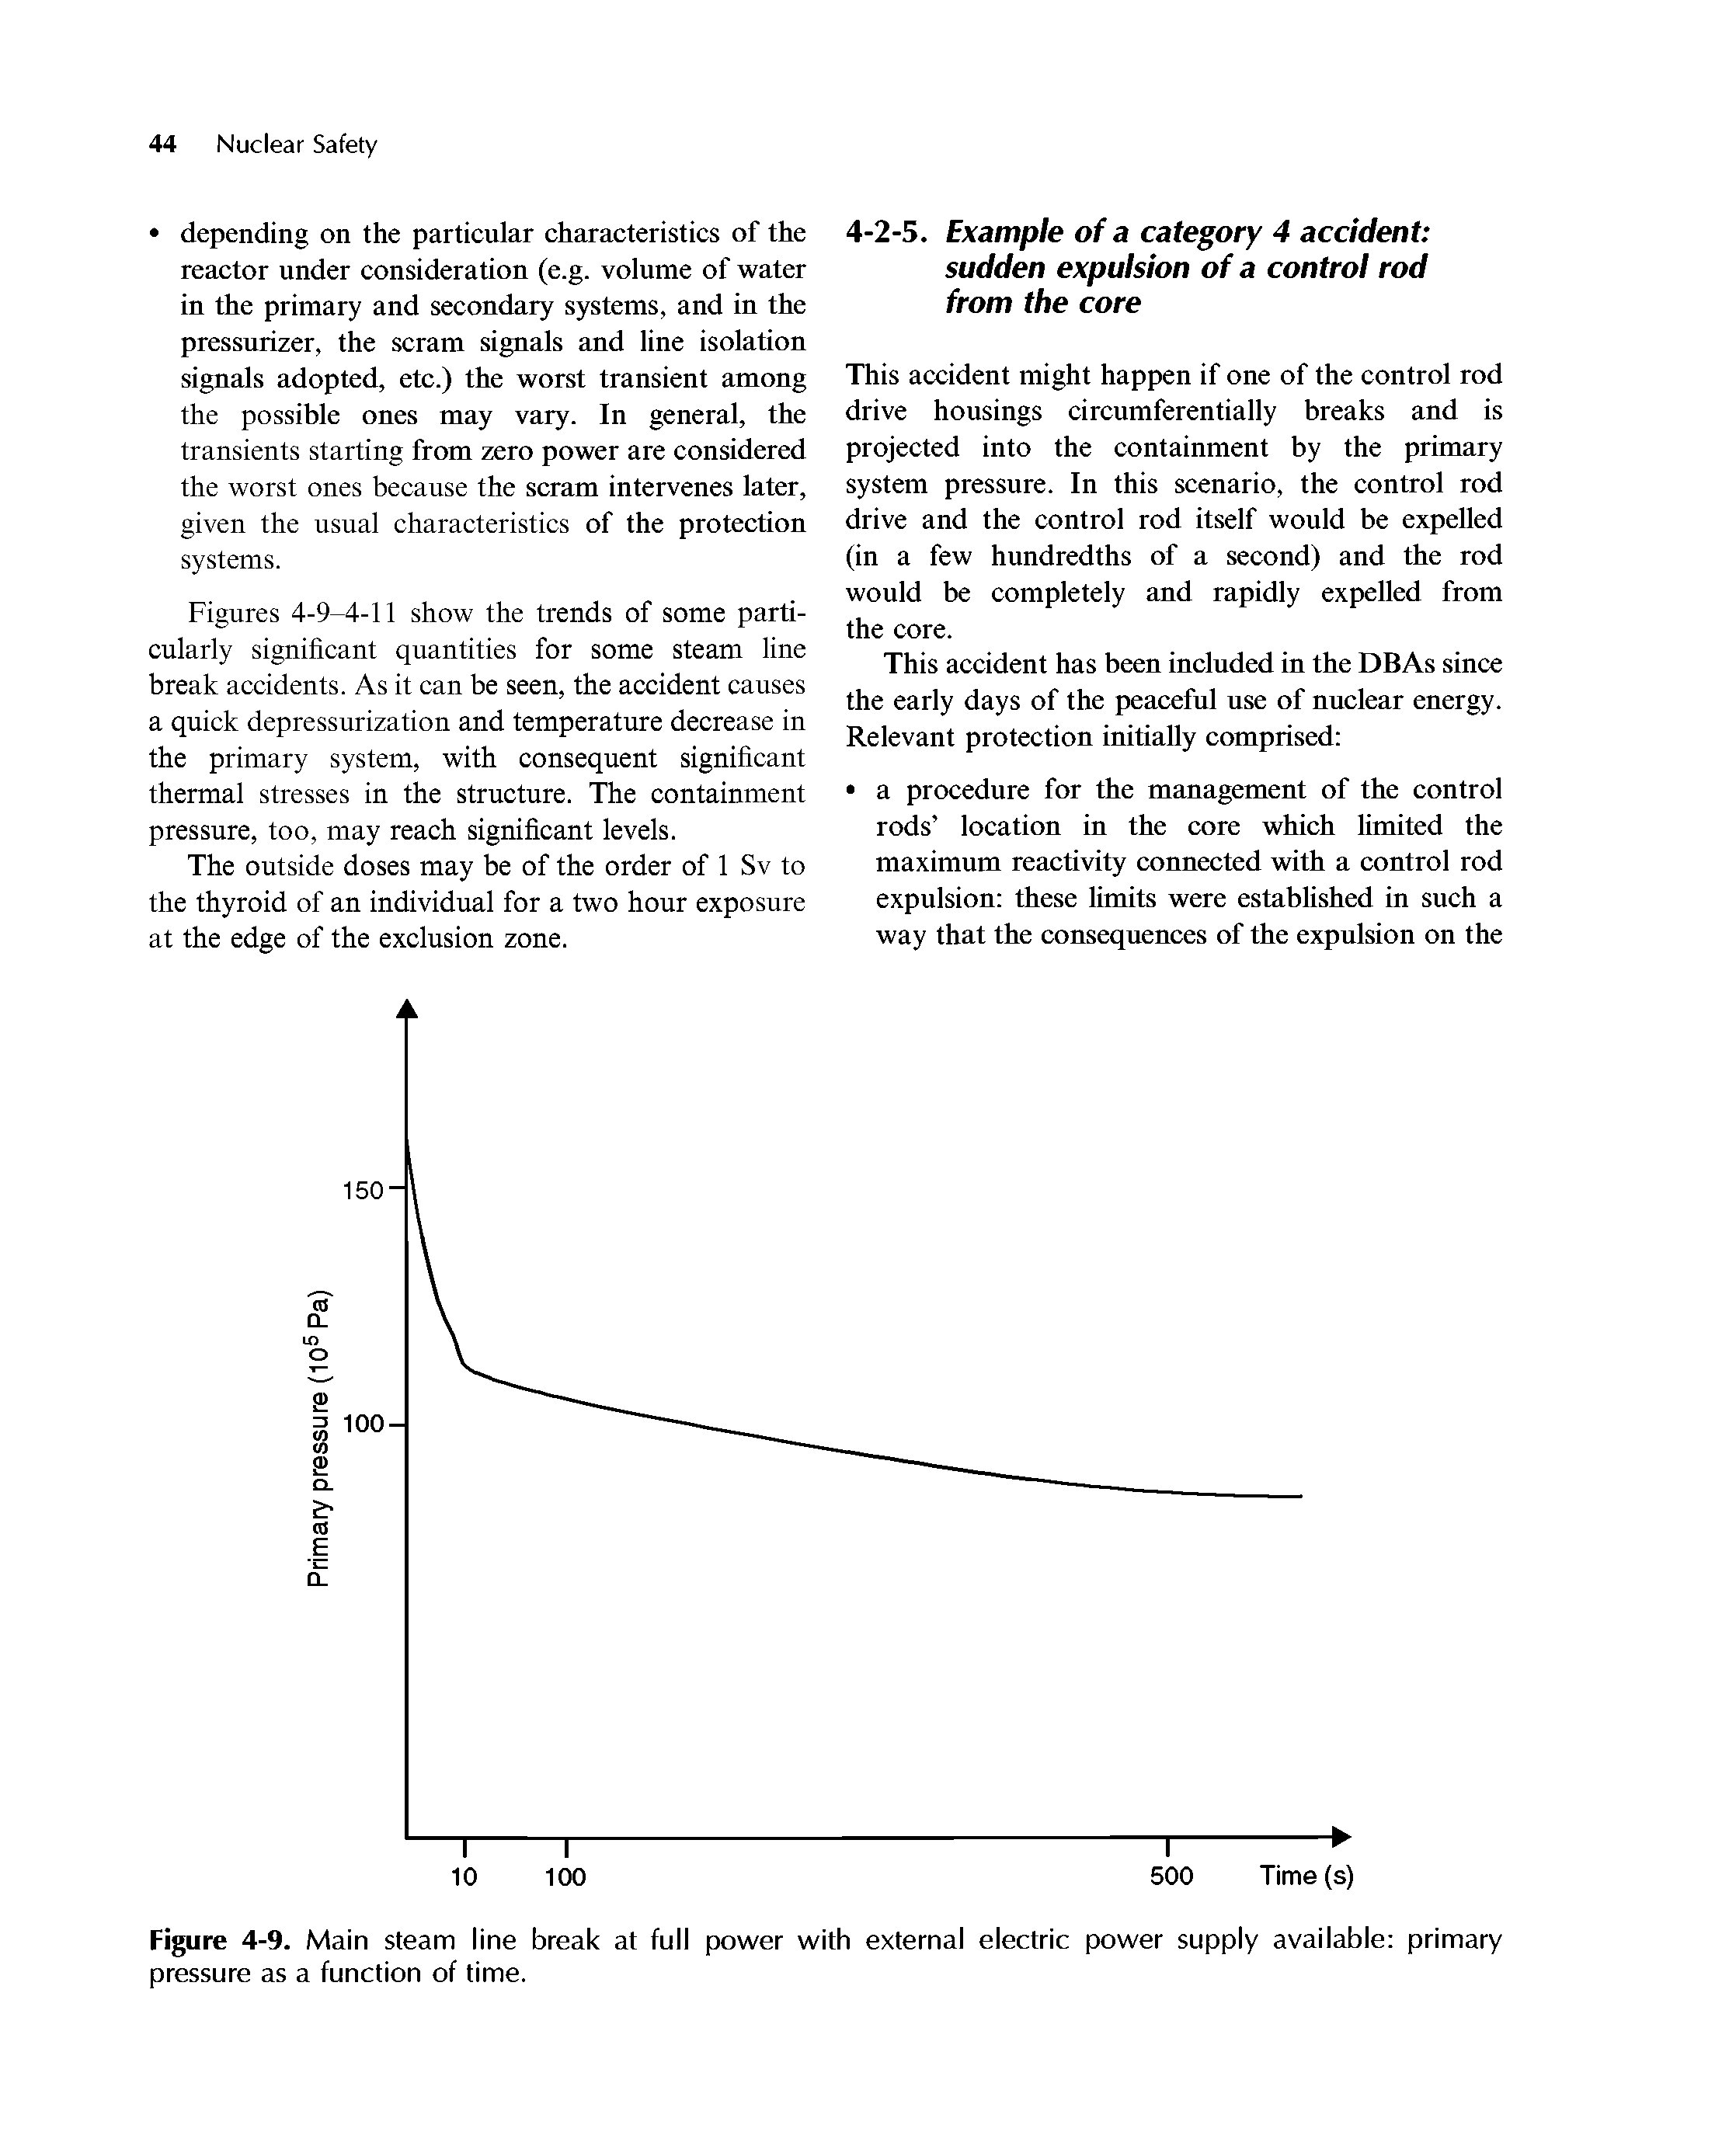 Figure 4-9. Main steam line break at full power with external electric power supply available primary pressure as a function of time.